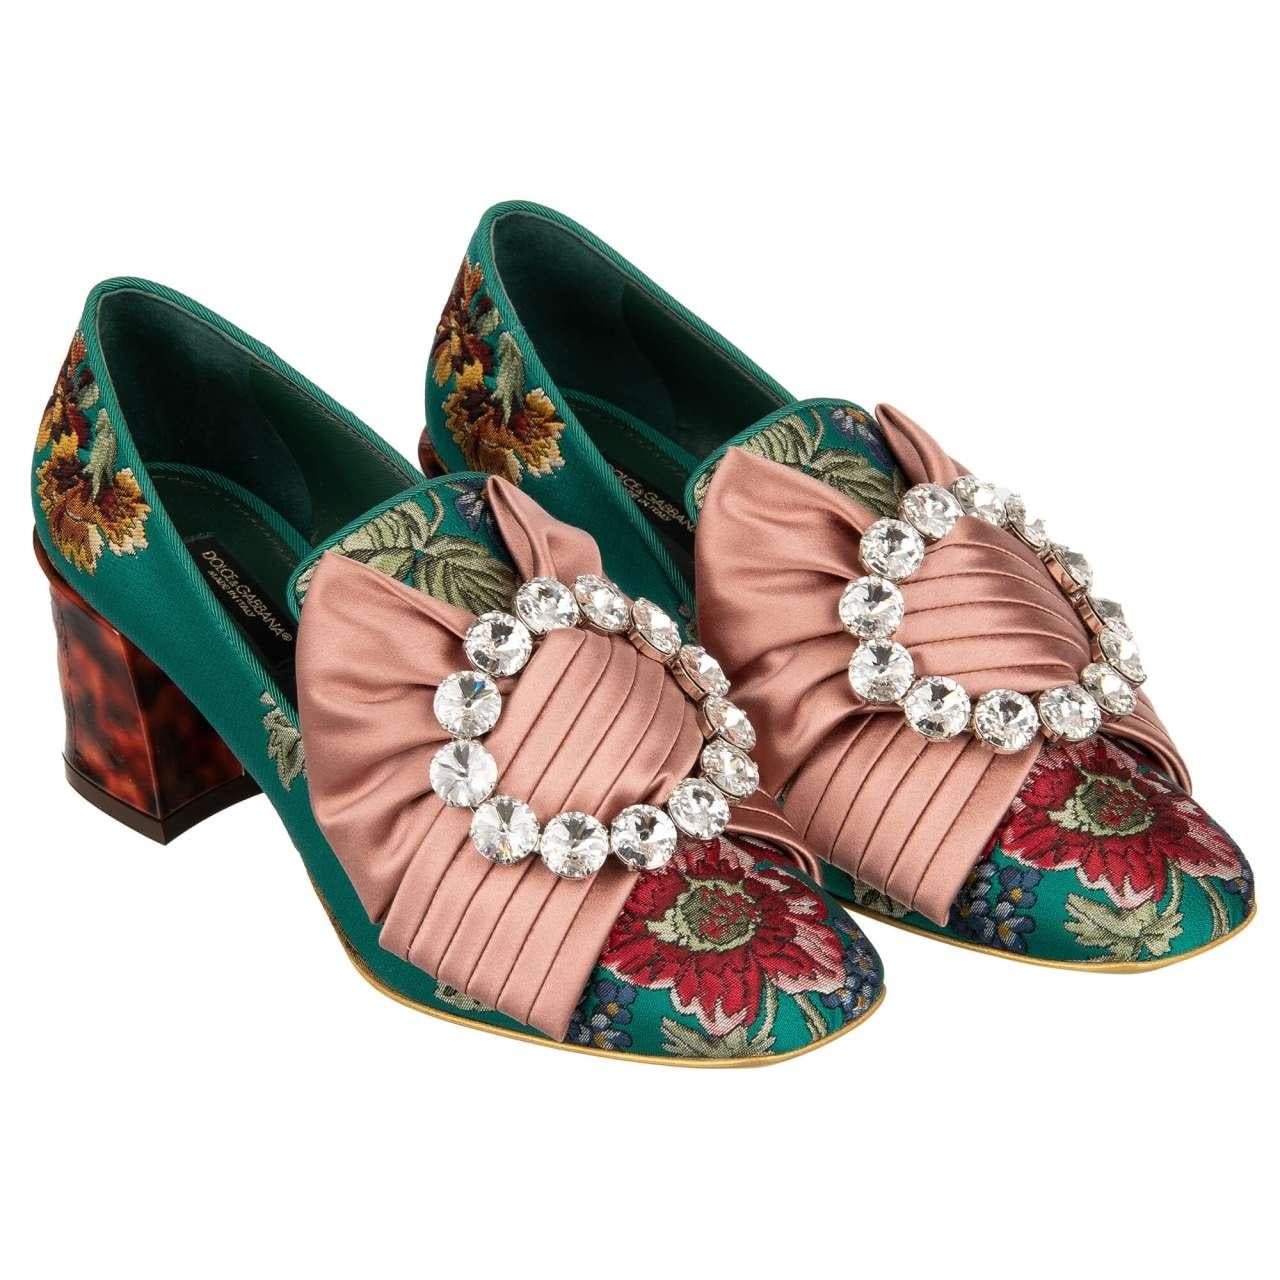 - Baroque flower brocade Pumps JACKIE with silk crystal bow brooch in green and pink by DOLCE & GABBANA - New with Box - MADE IN ITALY - Leopard patent leather heel - Model: CD1422-AJ374-8H527 - Material: 64% Polyester, 19% Calf leather, 8% Viscose,